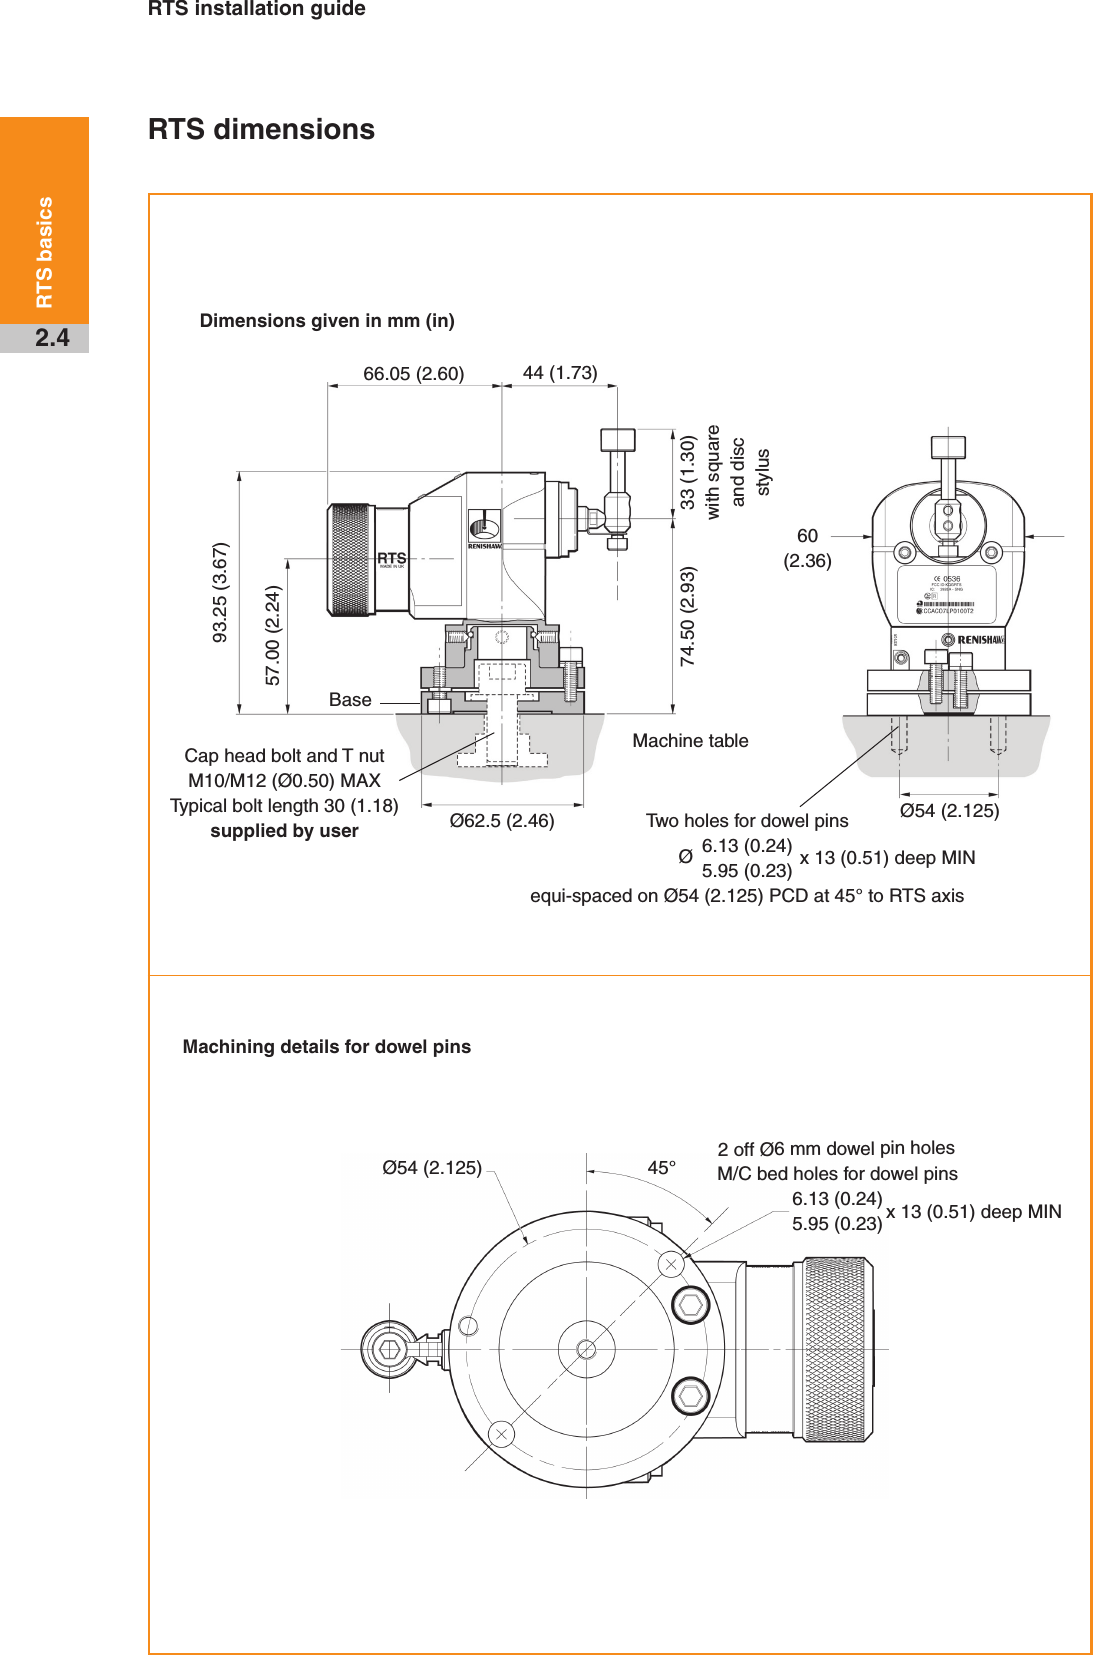 RTS installation guide2.4RTS basicsRTS dimensionsDimensions given in mm (in)Machining details for dowel pinsMachine tableØ62.5 (2.46)33 (1.30)with square and disc stylus44 (1.73)BaseØ54 (2.125)Ø54 (2.125)93.25 (3.67)57.00 (2.24)74.50 (2.93)60(2.36)Two holes for dowel pins 6.13 (0.24)5.95 (0.23)equi-spaced on Ø54 (2.125) PCD at 45° to RTS axisØx 13 (0.51) deep MINCap head bolt and T nut M10/M12 (Ø0.50) MAX Typical bolt length 30 (1.18) supplied by user66.05 (2.60)M/C bed holes for dowel pins 6.13 (0.24)5.95 (0.23) x 13 (0.51) deep MIN45°2 off Ø6 mm dowel pin holes